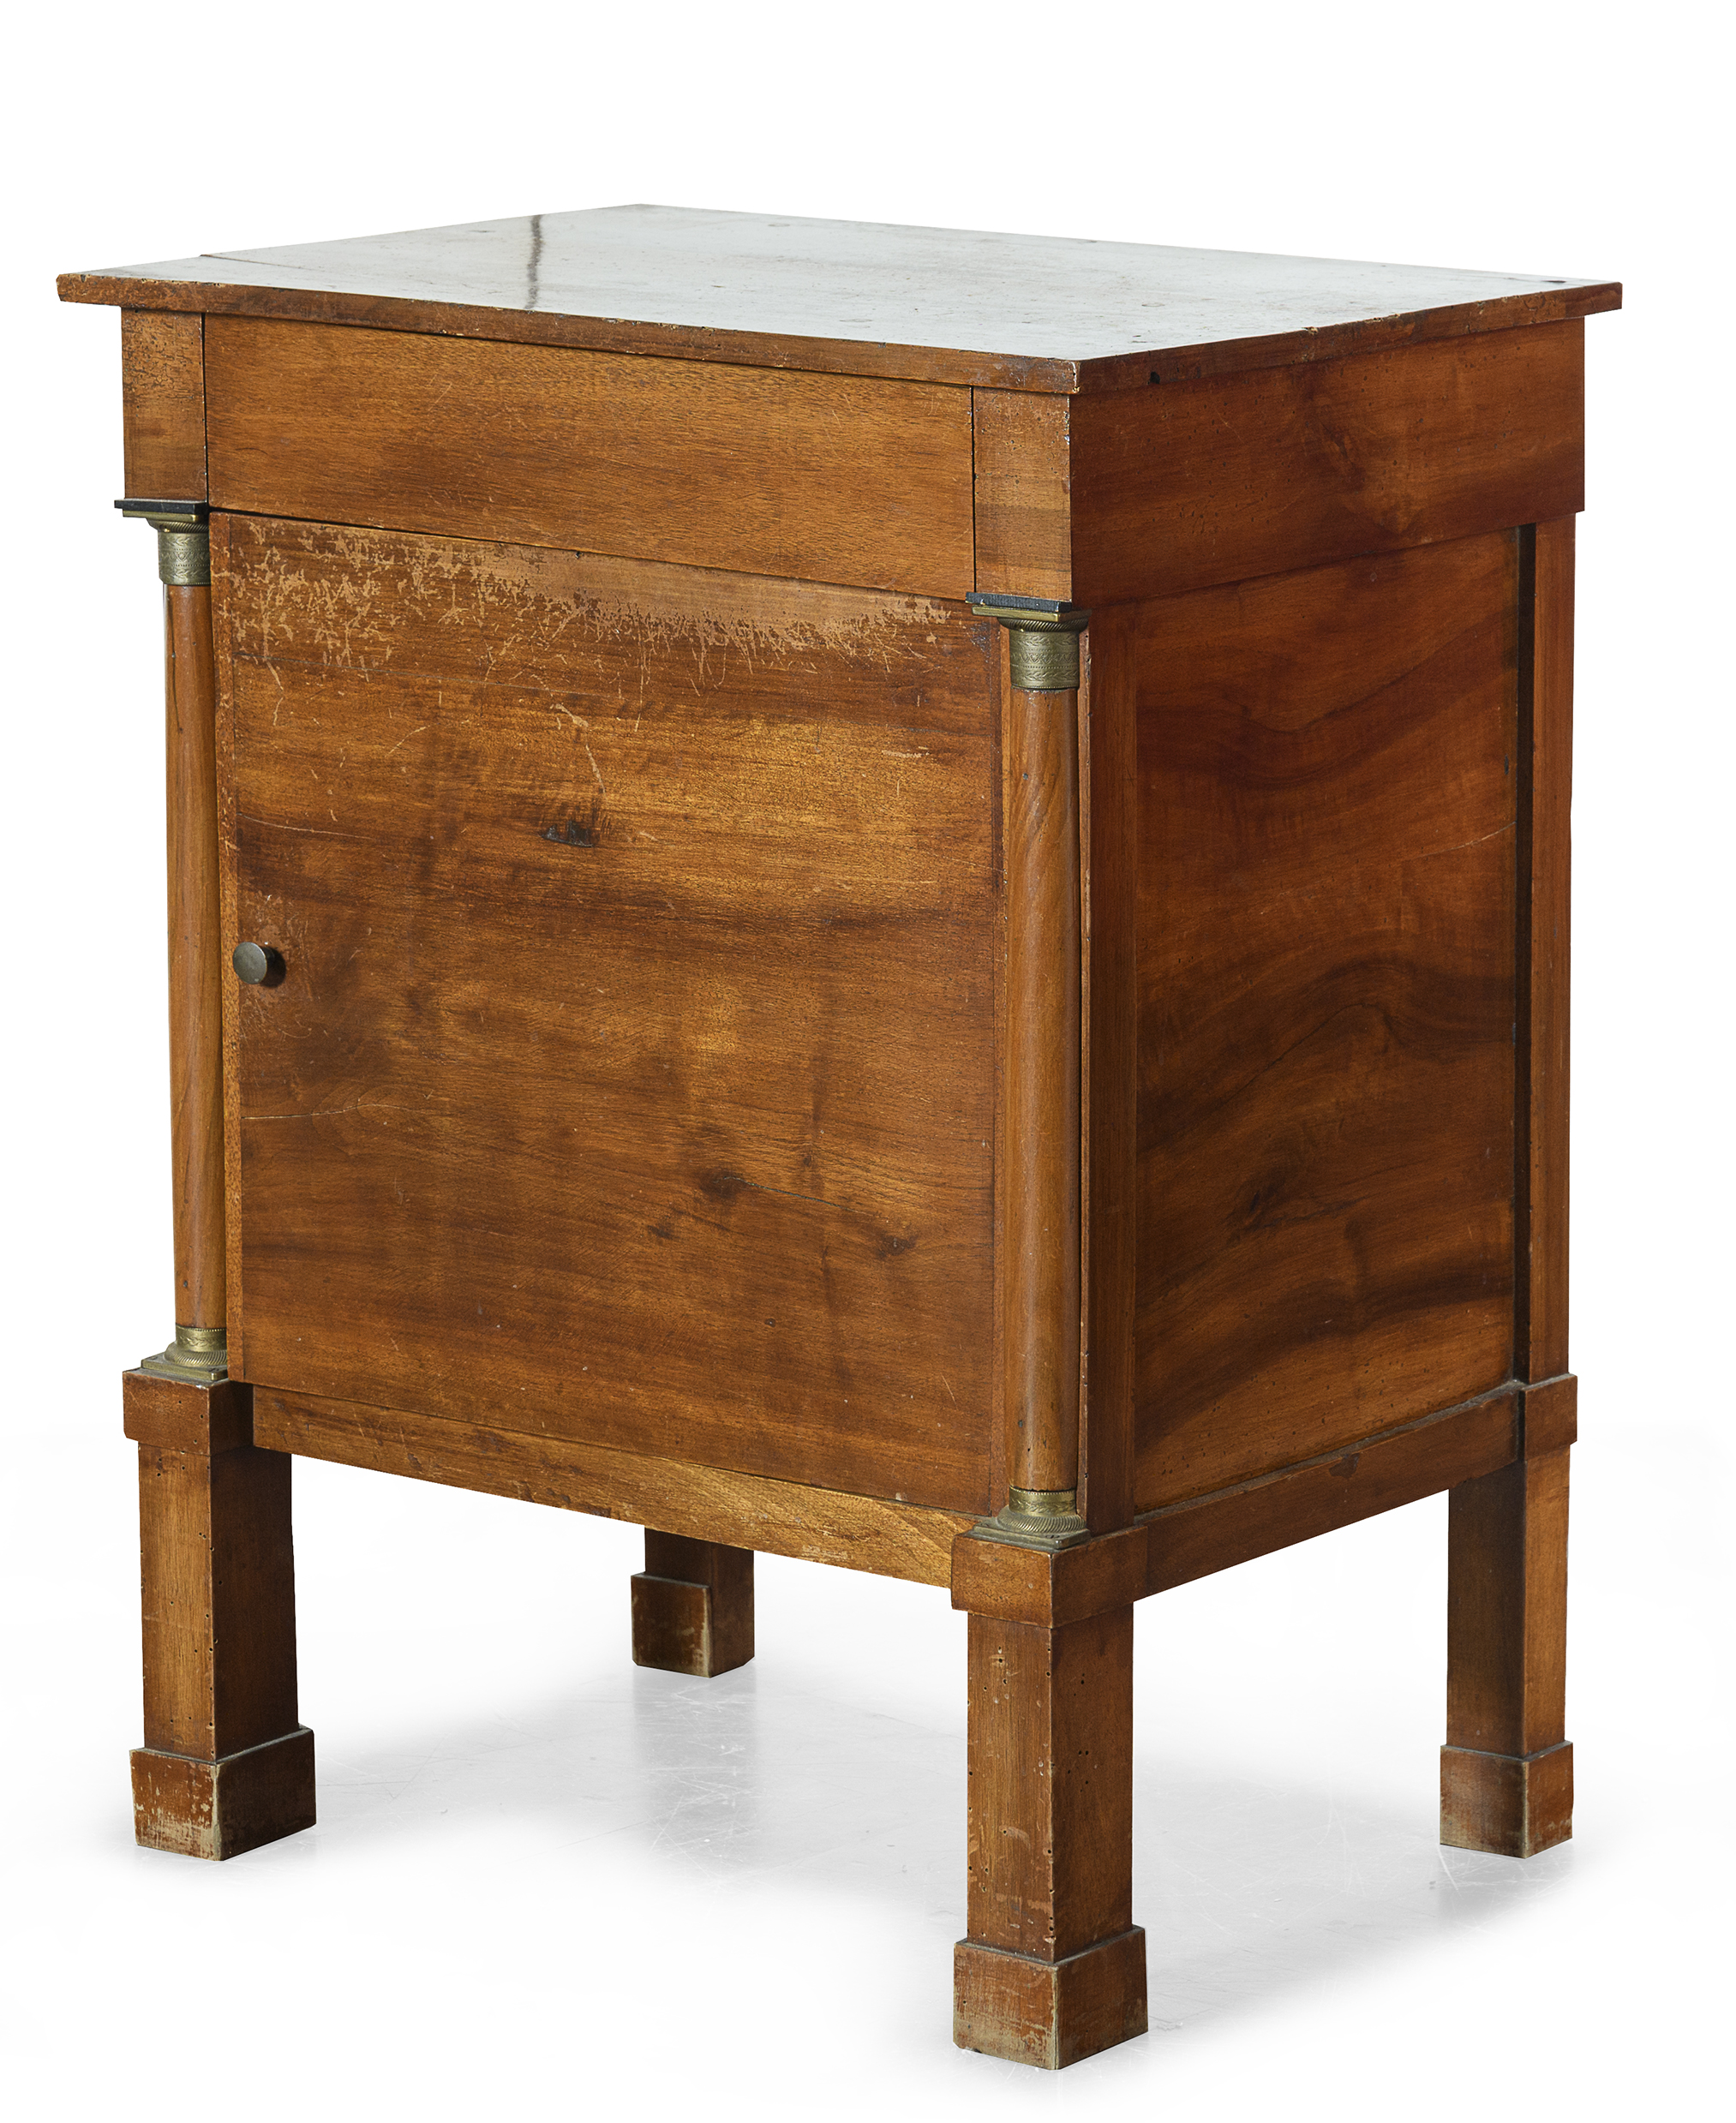 WALNUT BEDSIDE TABLE CENTRAL ITALY EMPIRE PERIOD